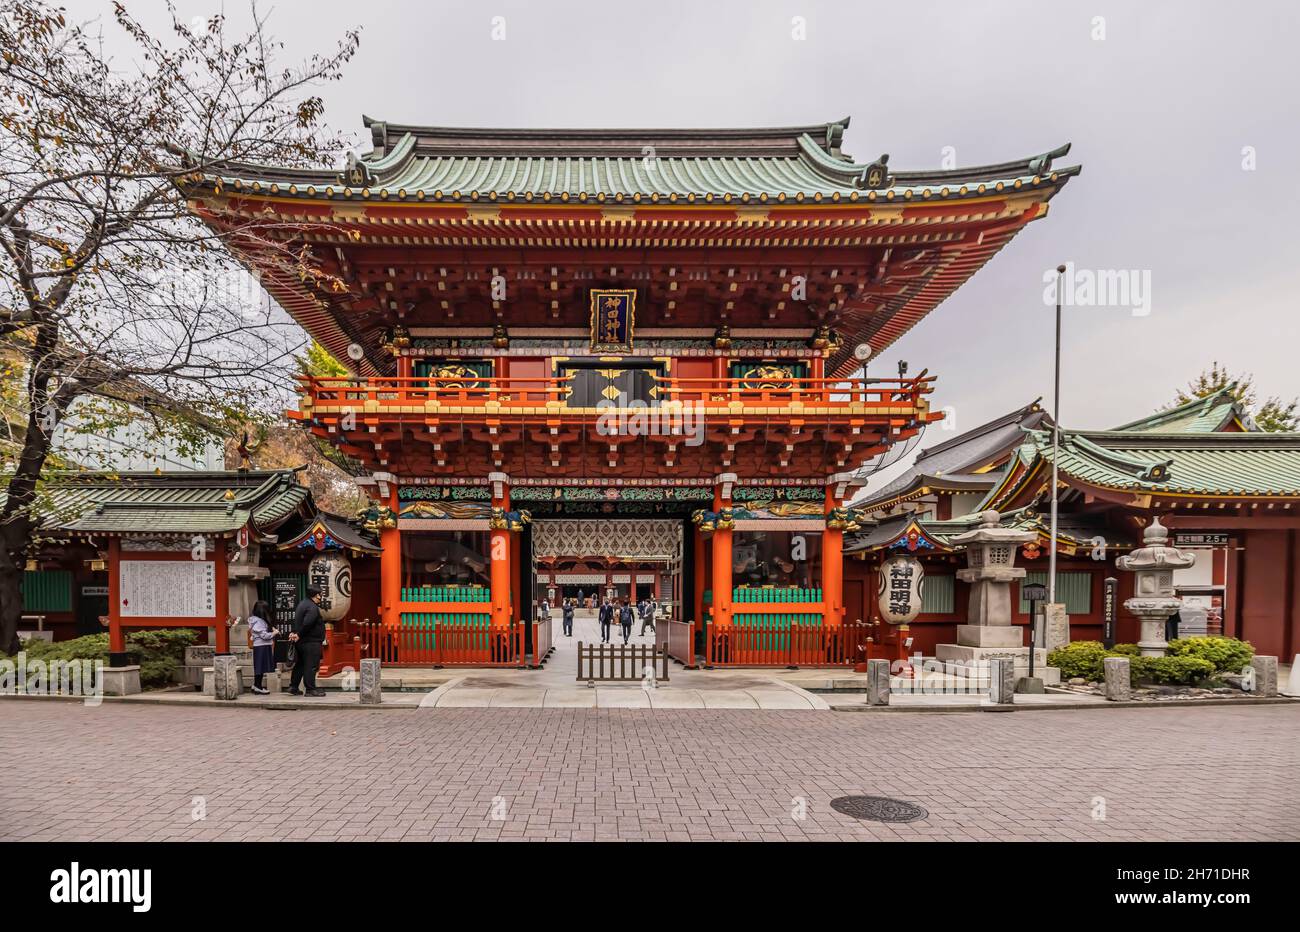 Kanda Myojin Shrine, located in Sotokanda, Chiyoda City, Tokyo. It's one of the 10 famous shrines of Tokyo. It has stage for drama, colorful office. Stock Photo